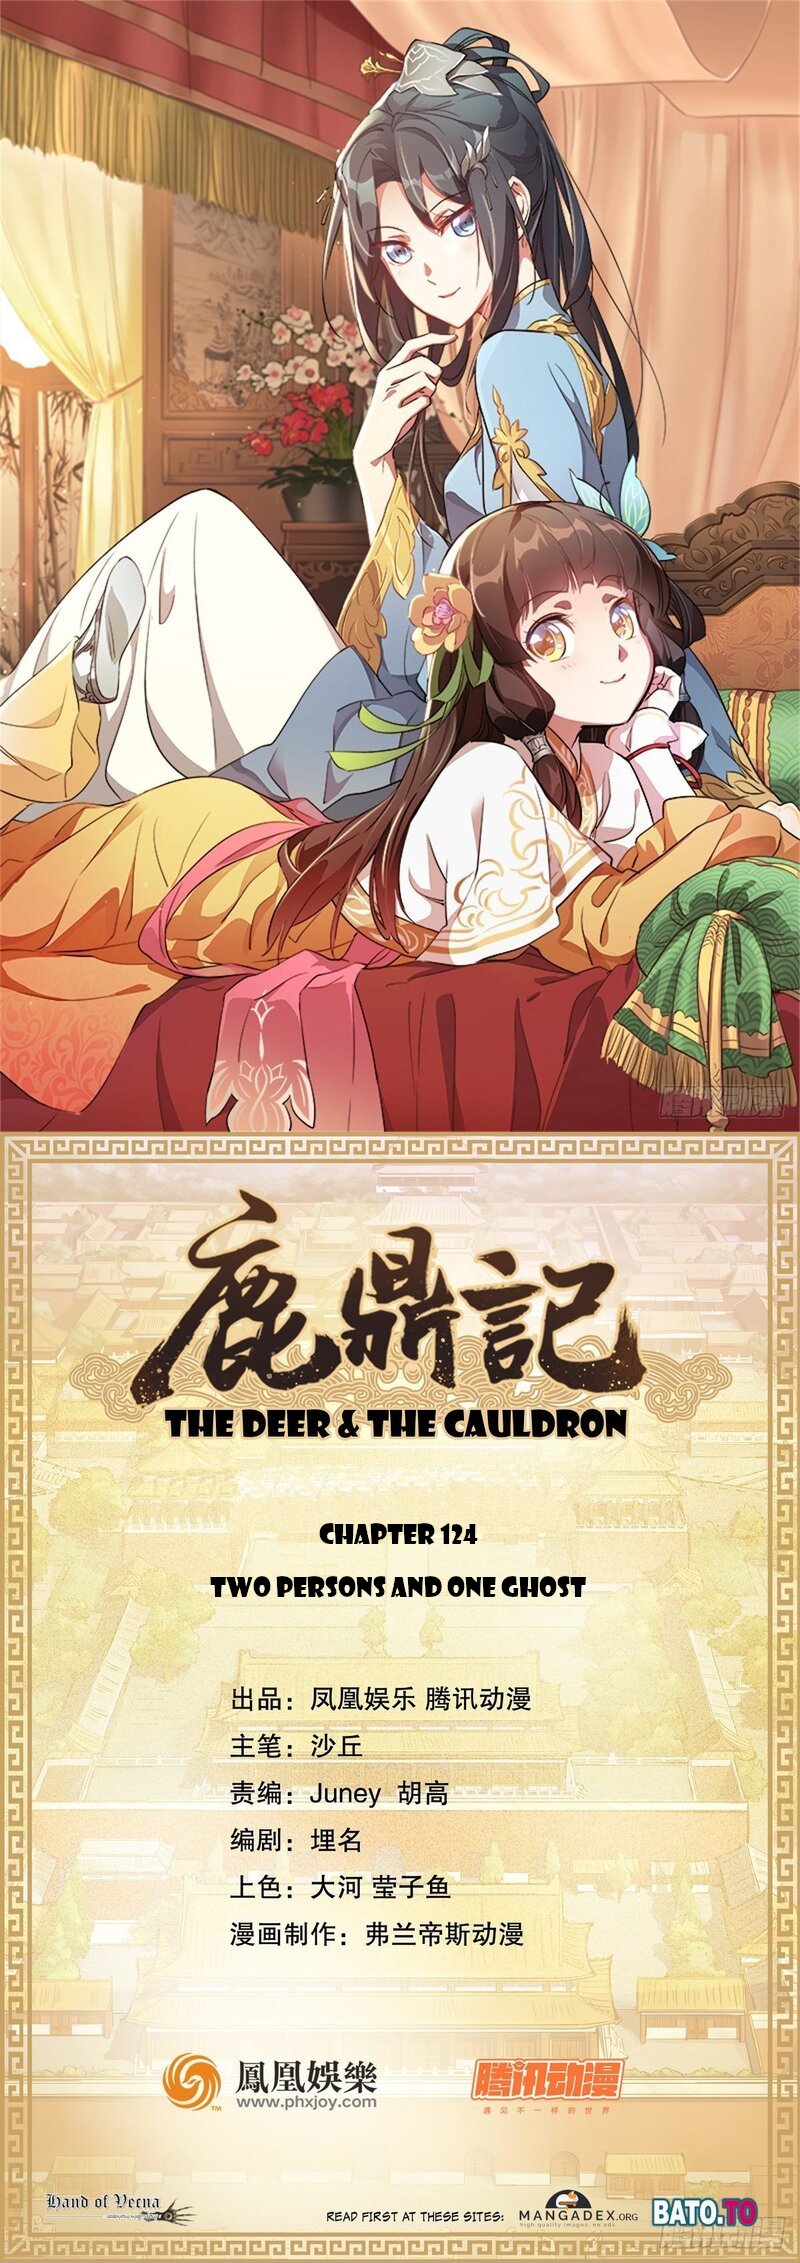 The Deer And The Cauldron Chapter 124 #1